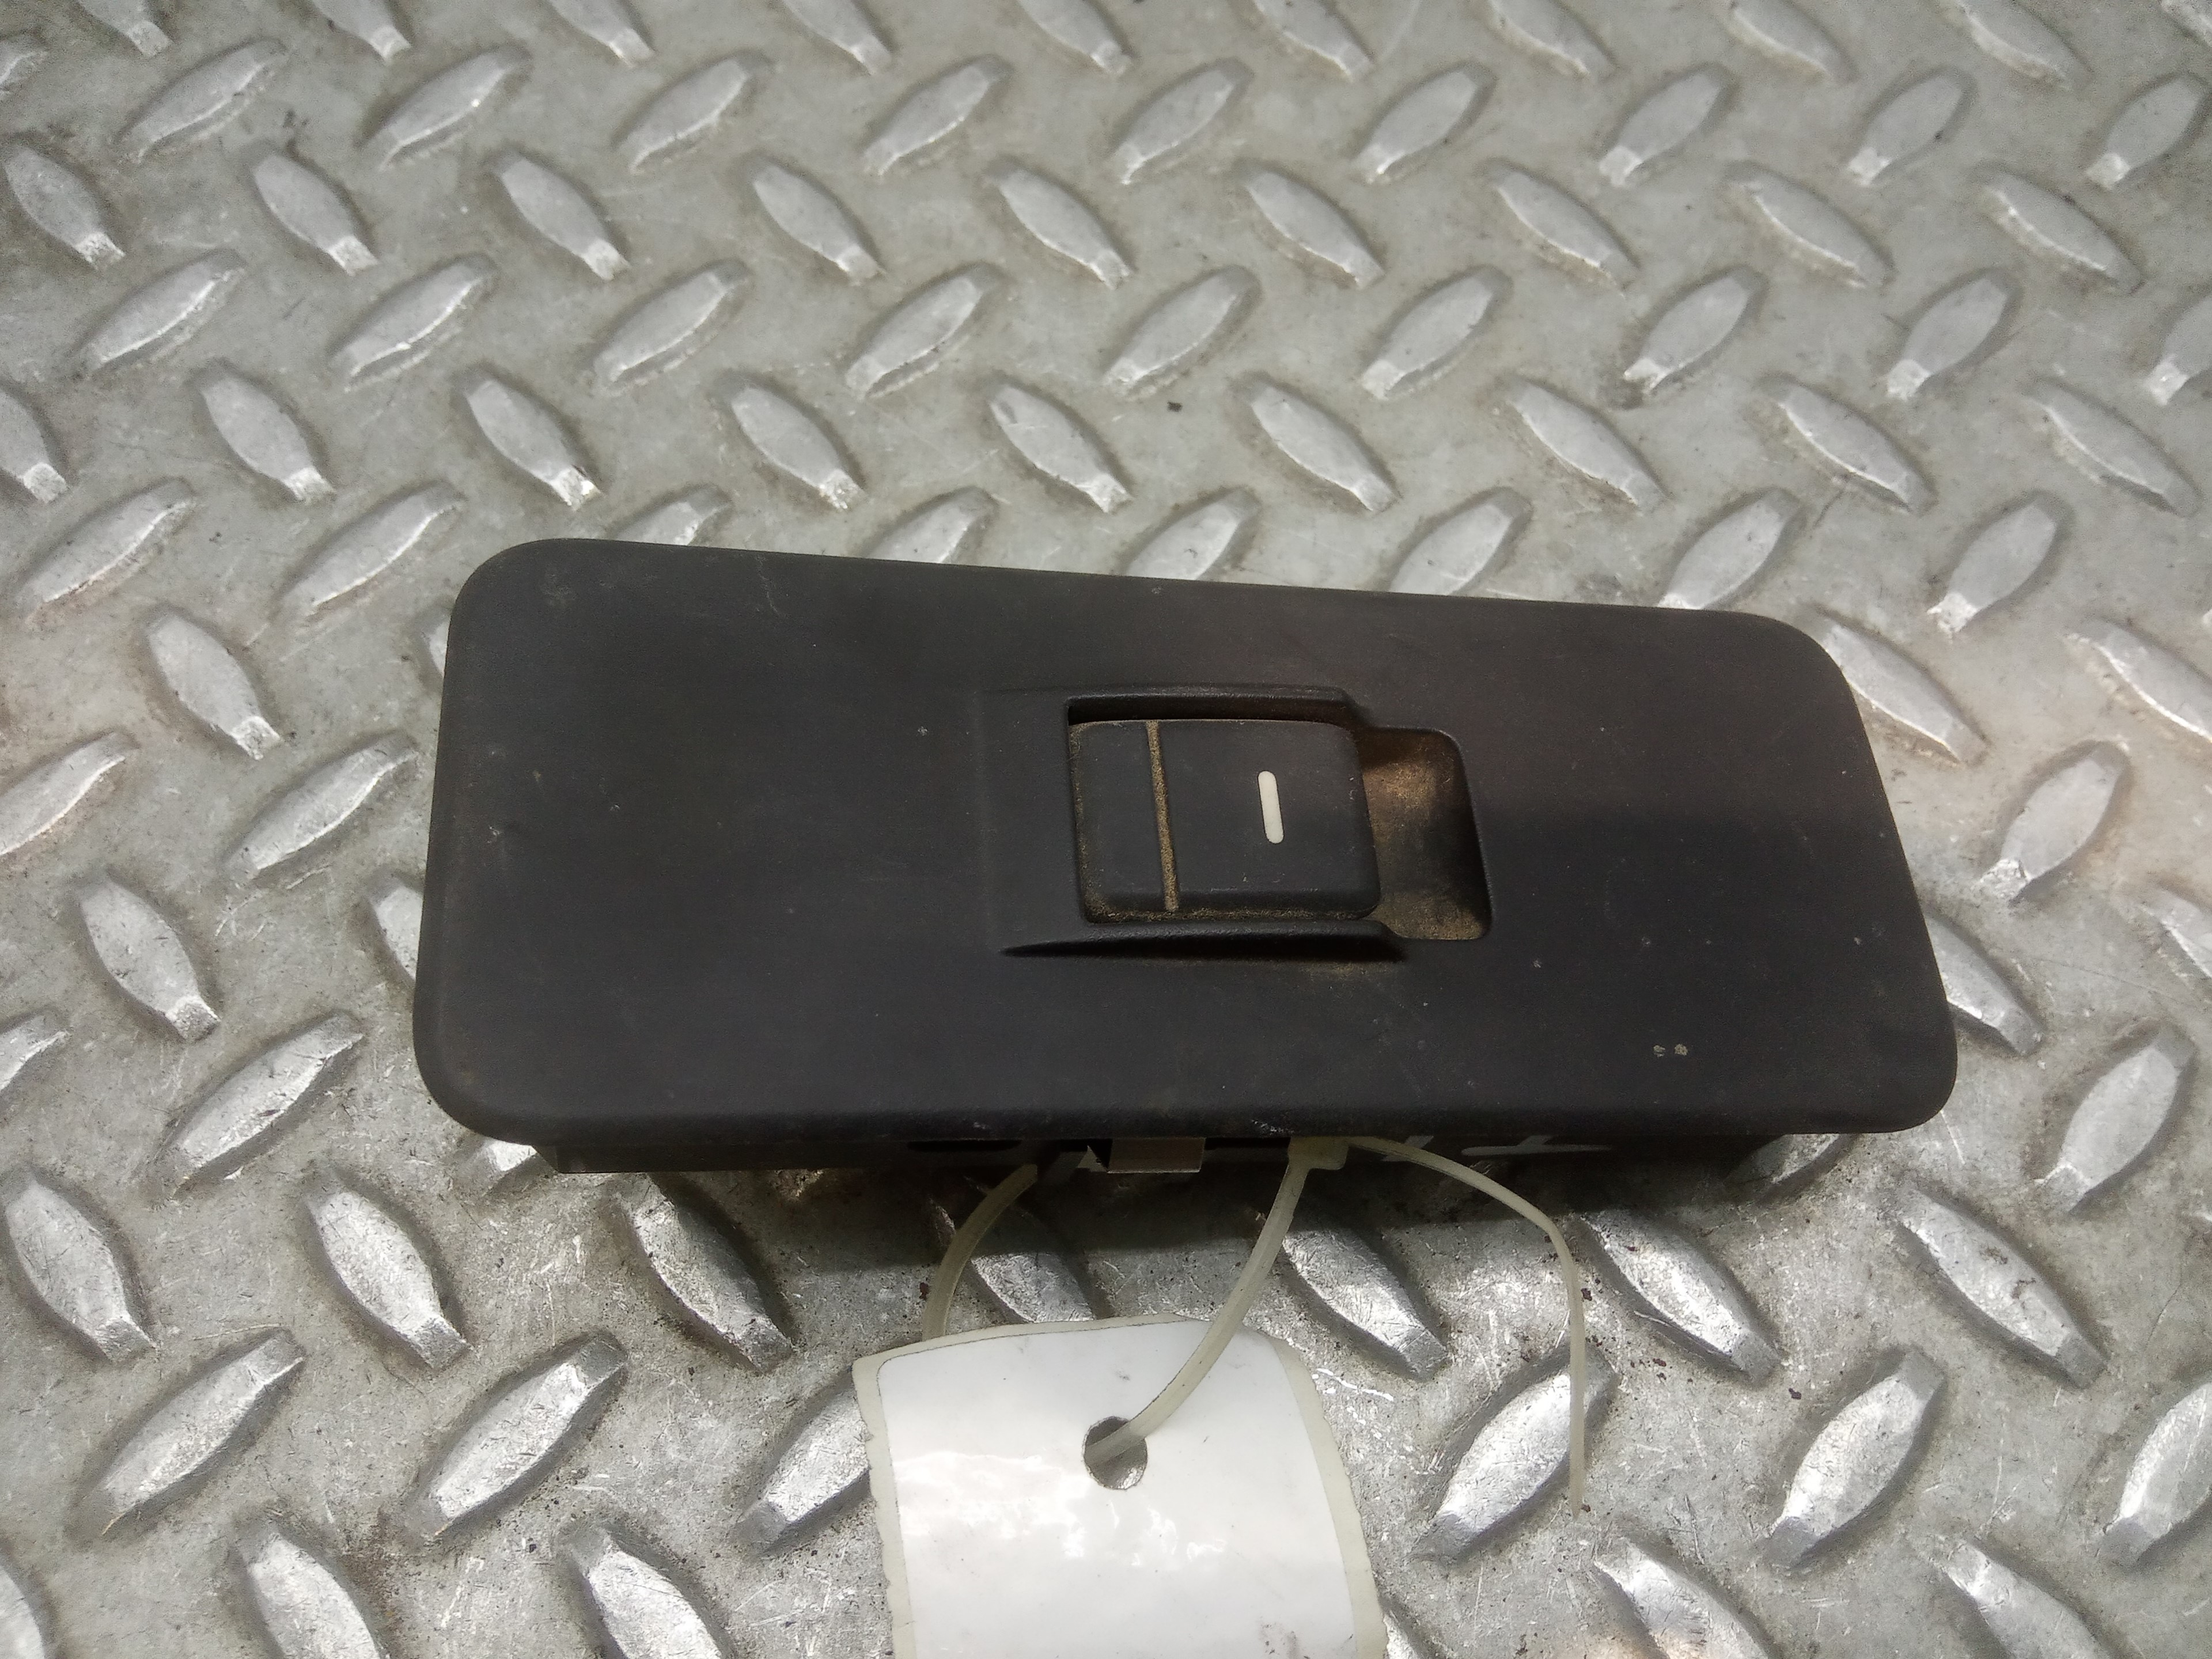 LAND ROVER Discovery 3 generation (2004-2009) Rear Right Door Window Control Switch YUD501070PVJ 23670140